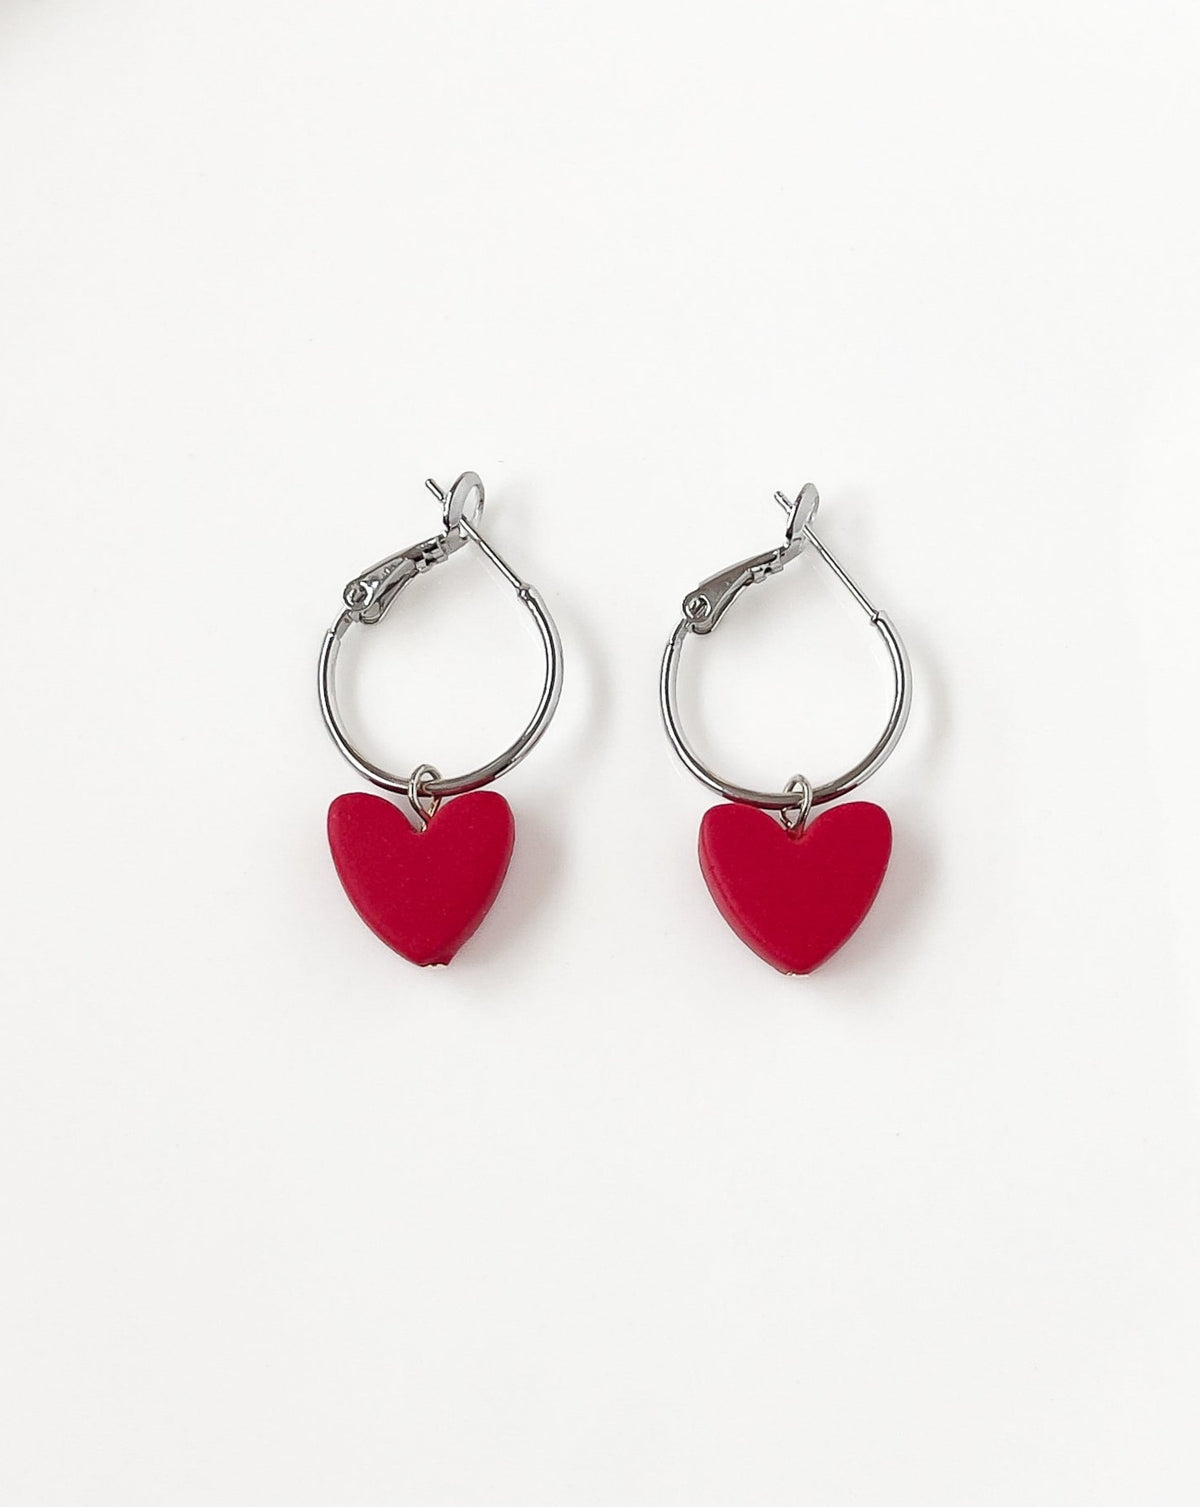 Close up of Charming Heart earrings with silver regular Hoops and Red Heart charm.